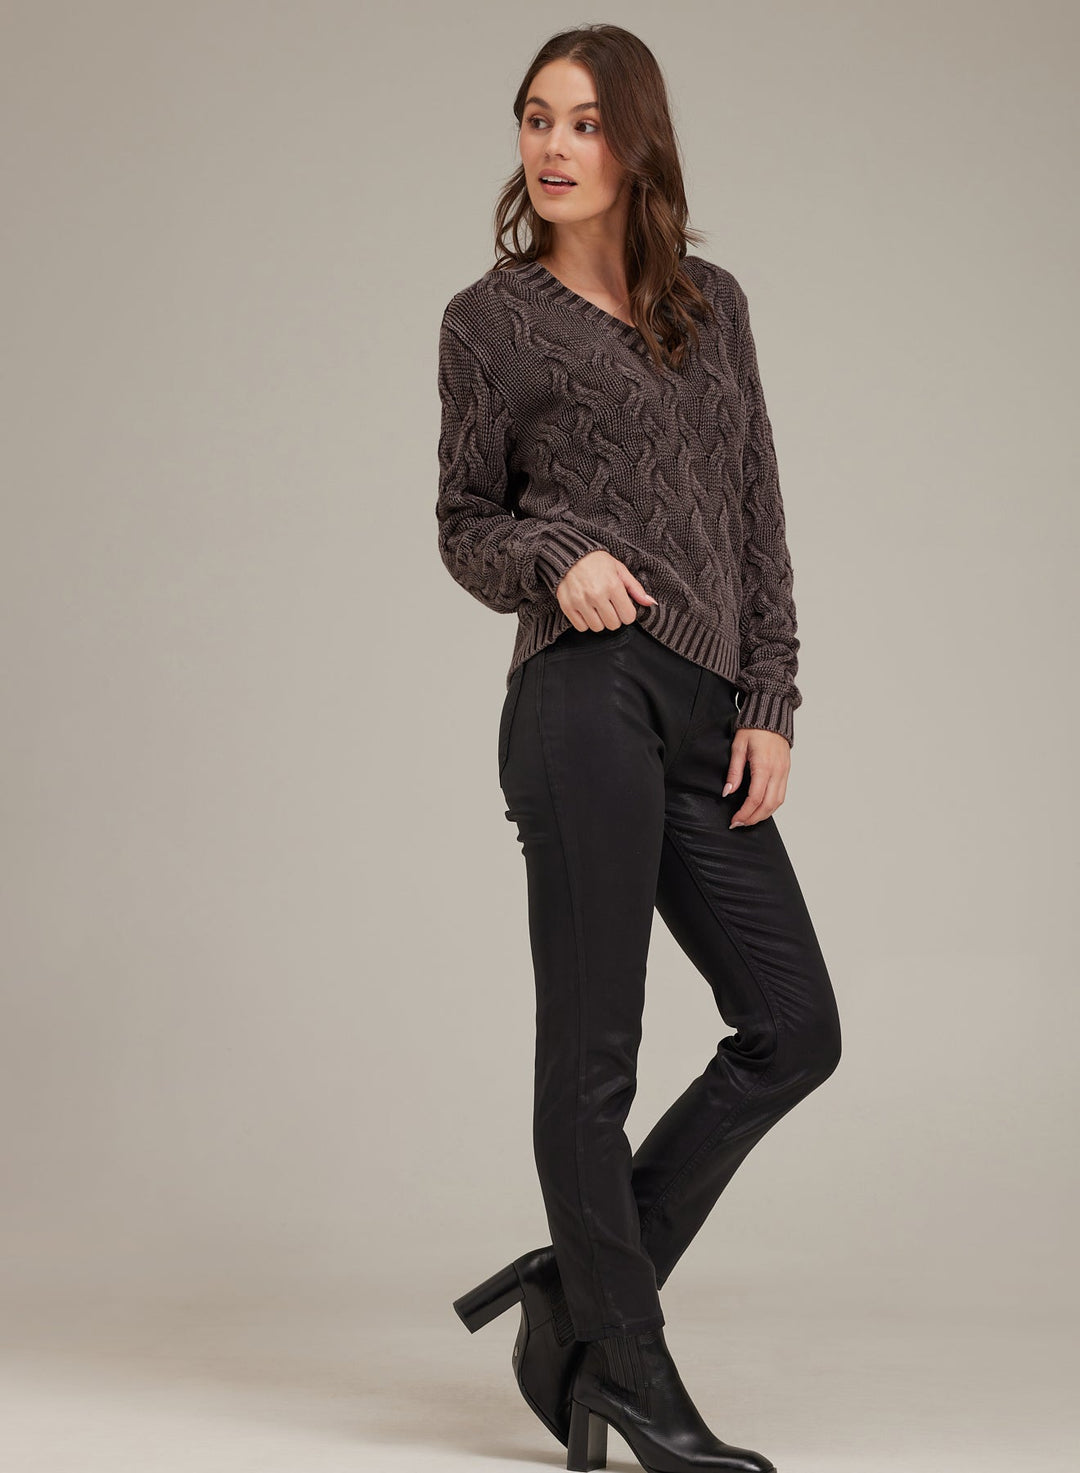 V-Neck Cable Knit Sweater in Coffee Mineral Wash